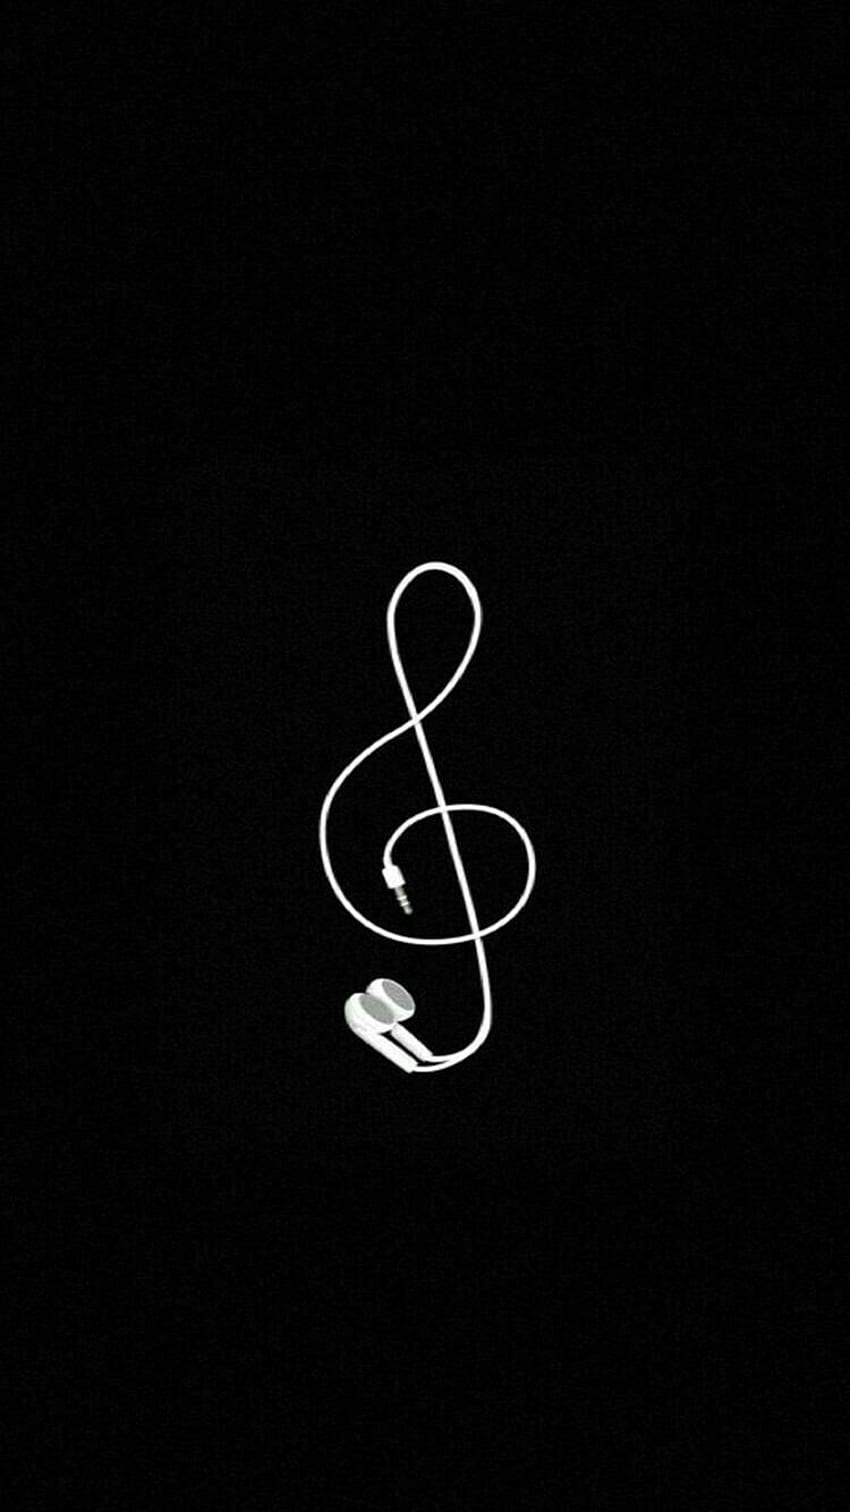 Simple Music treble clef earphones black and white iPhone, Android HD phone wallpaper